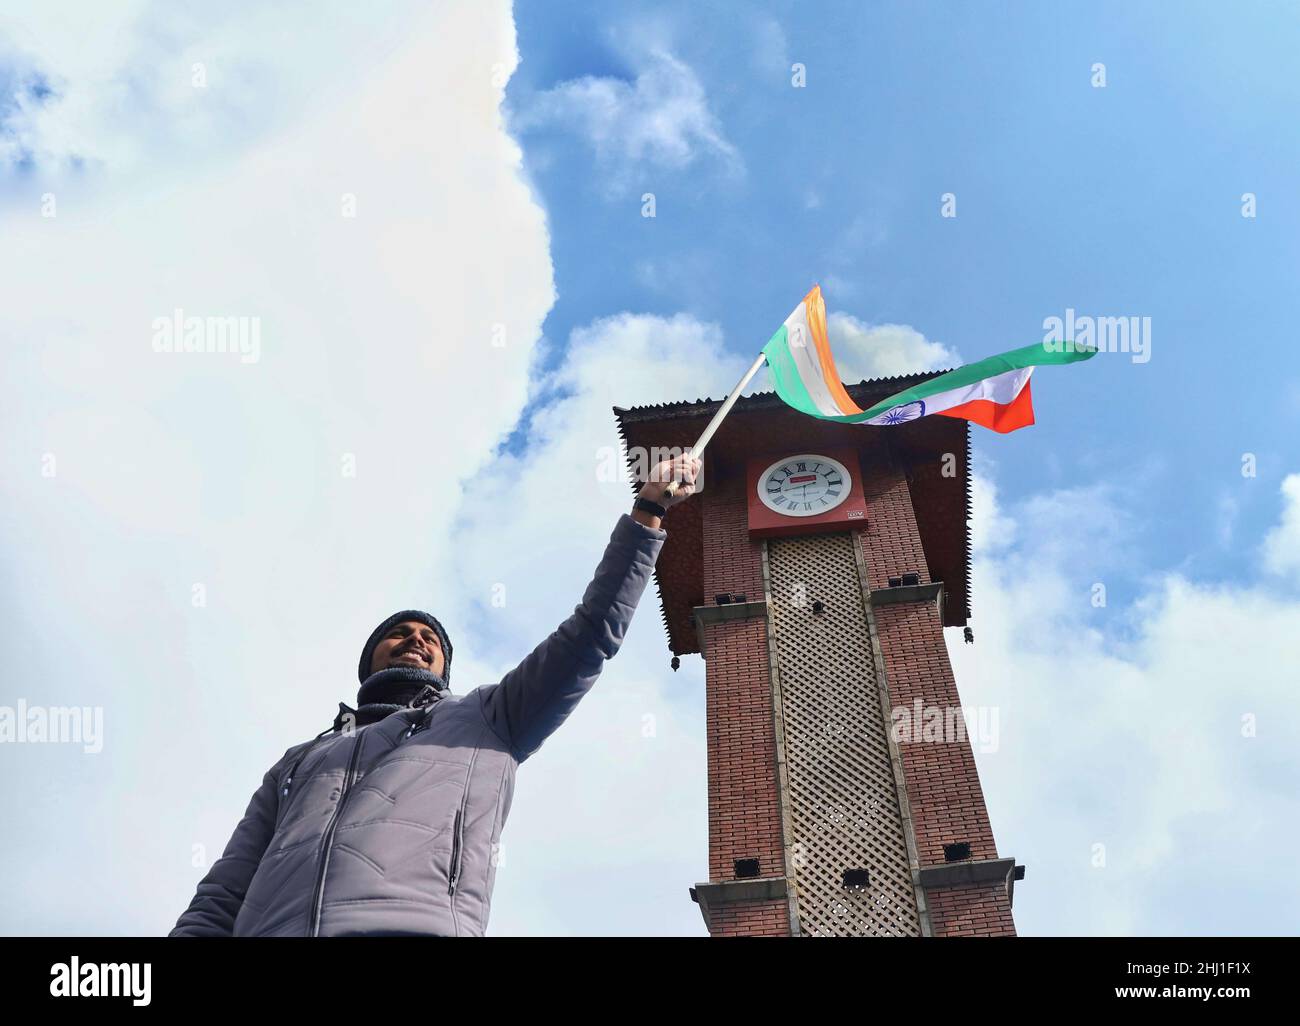 A Indian activist hold an Indian flag near a clock tower in Lal Chowk to celebrate India's 73rd Republic Day in Srinagar on January 26, 2022. (Photo by Faisal Bashir/INA Photo Agency/Sipa USA) Stock Photo